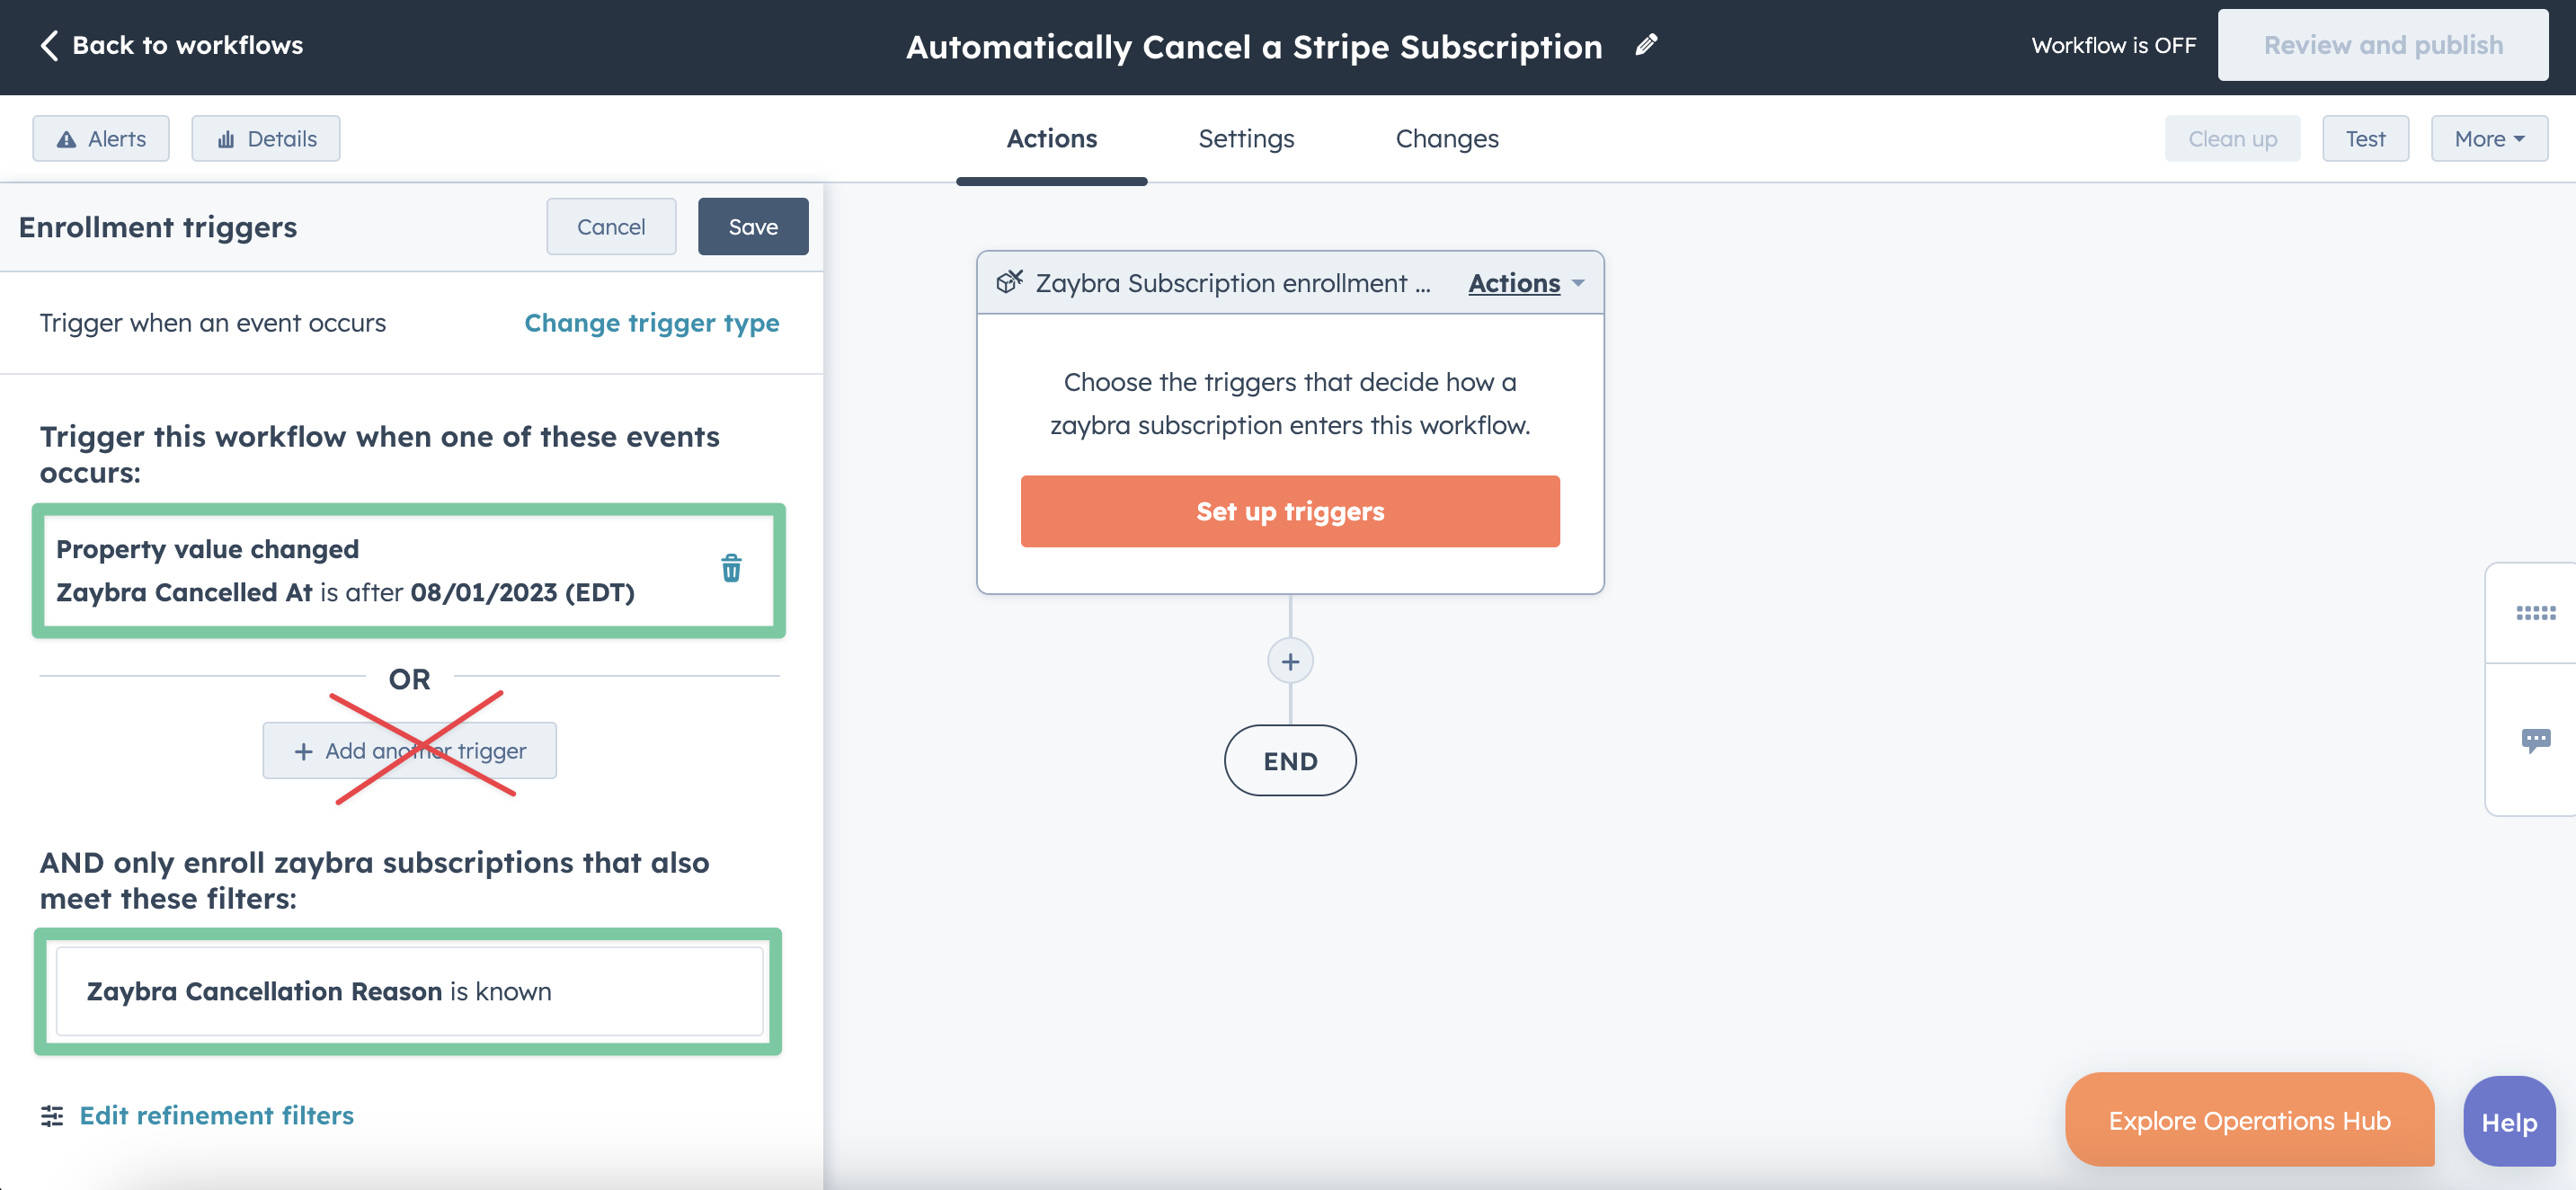 HubSpot how to cancel a stripe subscription using workflows